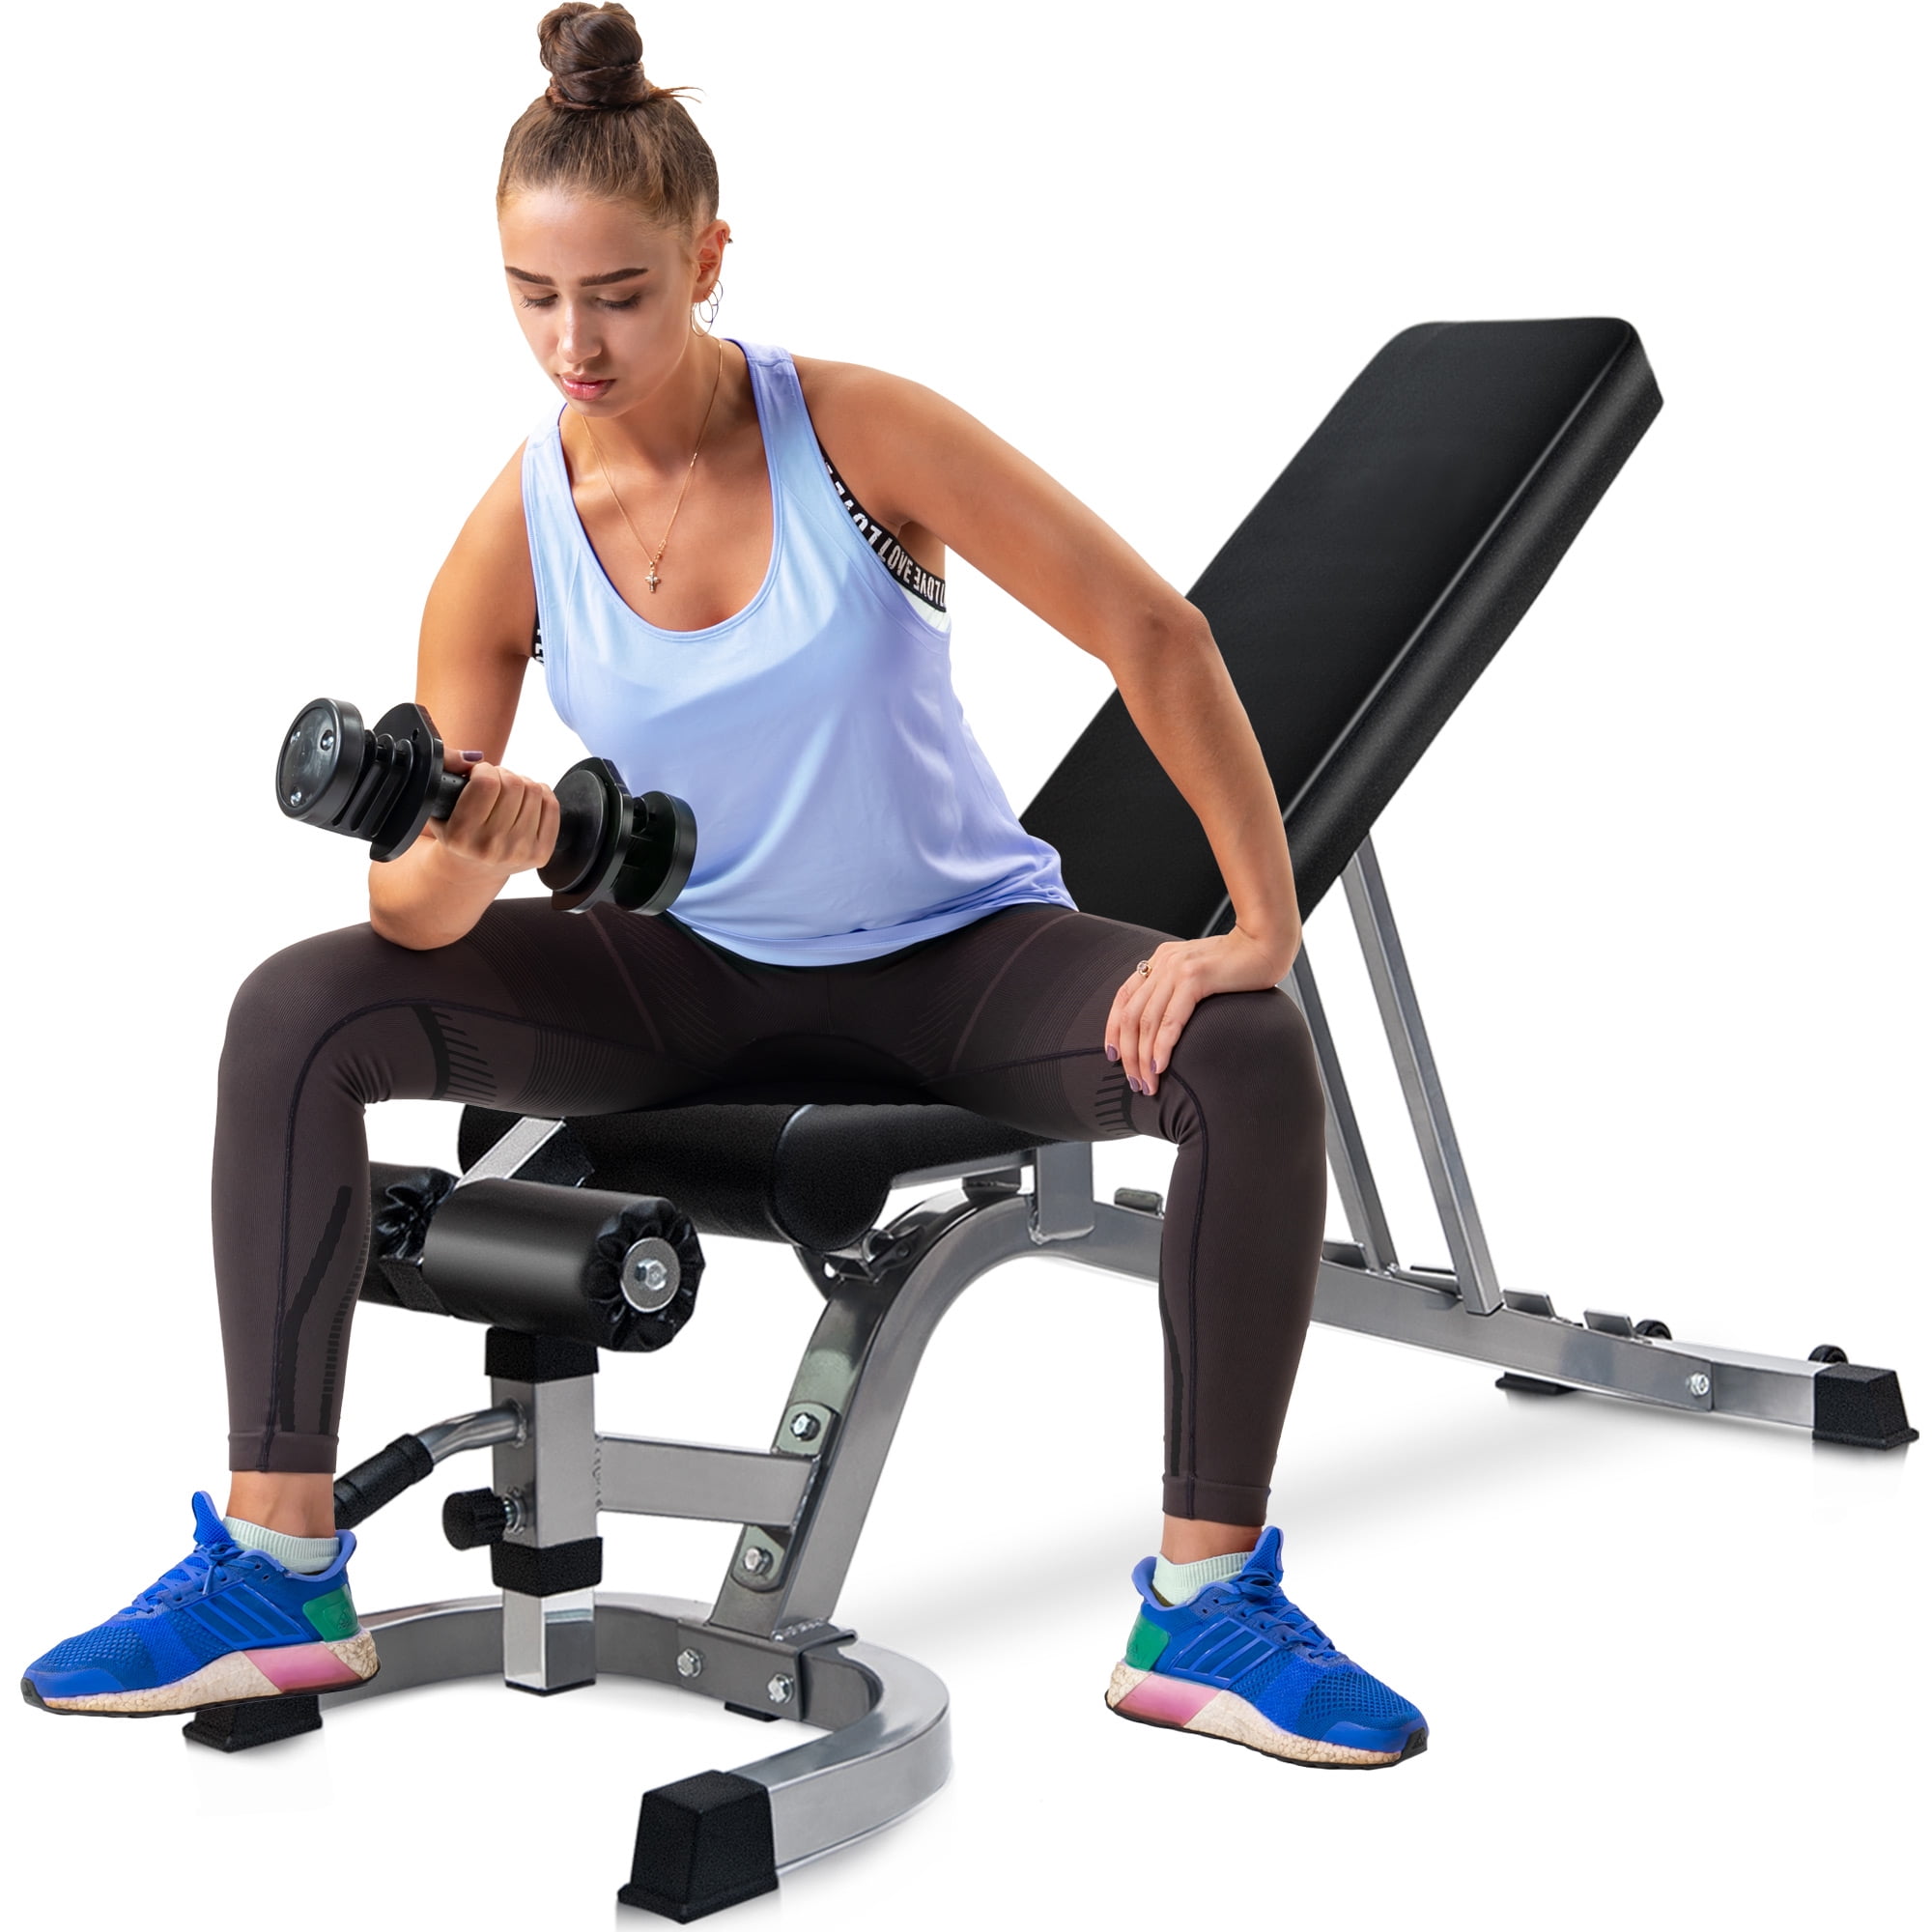 Folding Flat Weight Lifting Bench Workout Exercise Machine Home Fitness Gym 